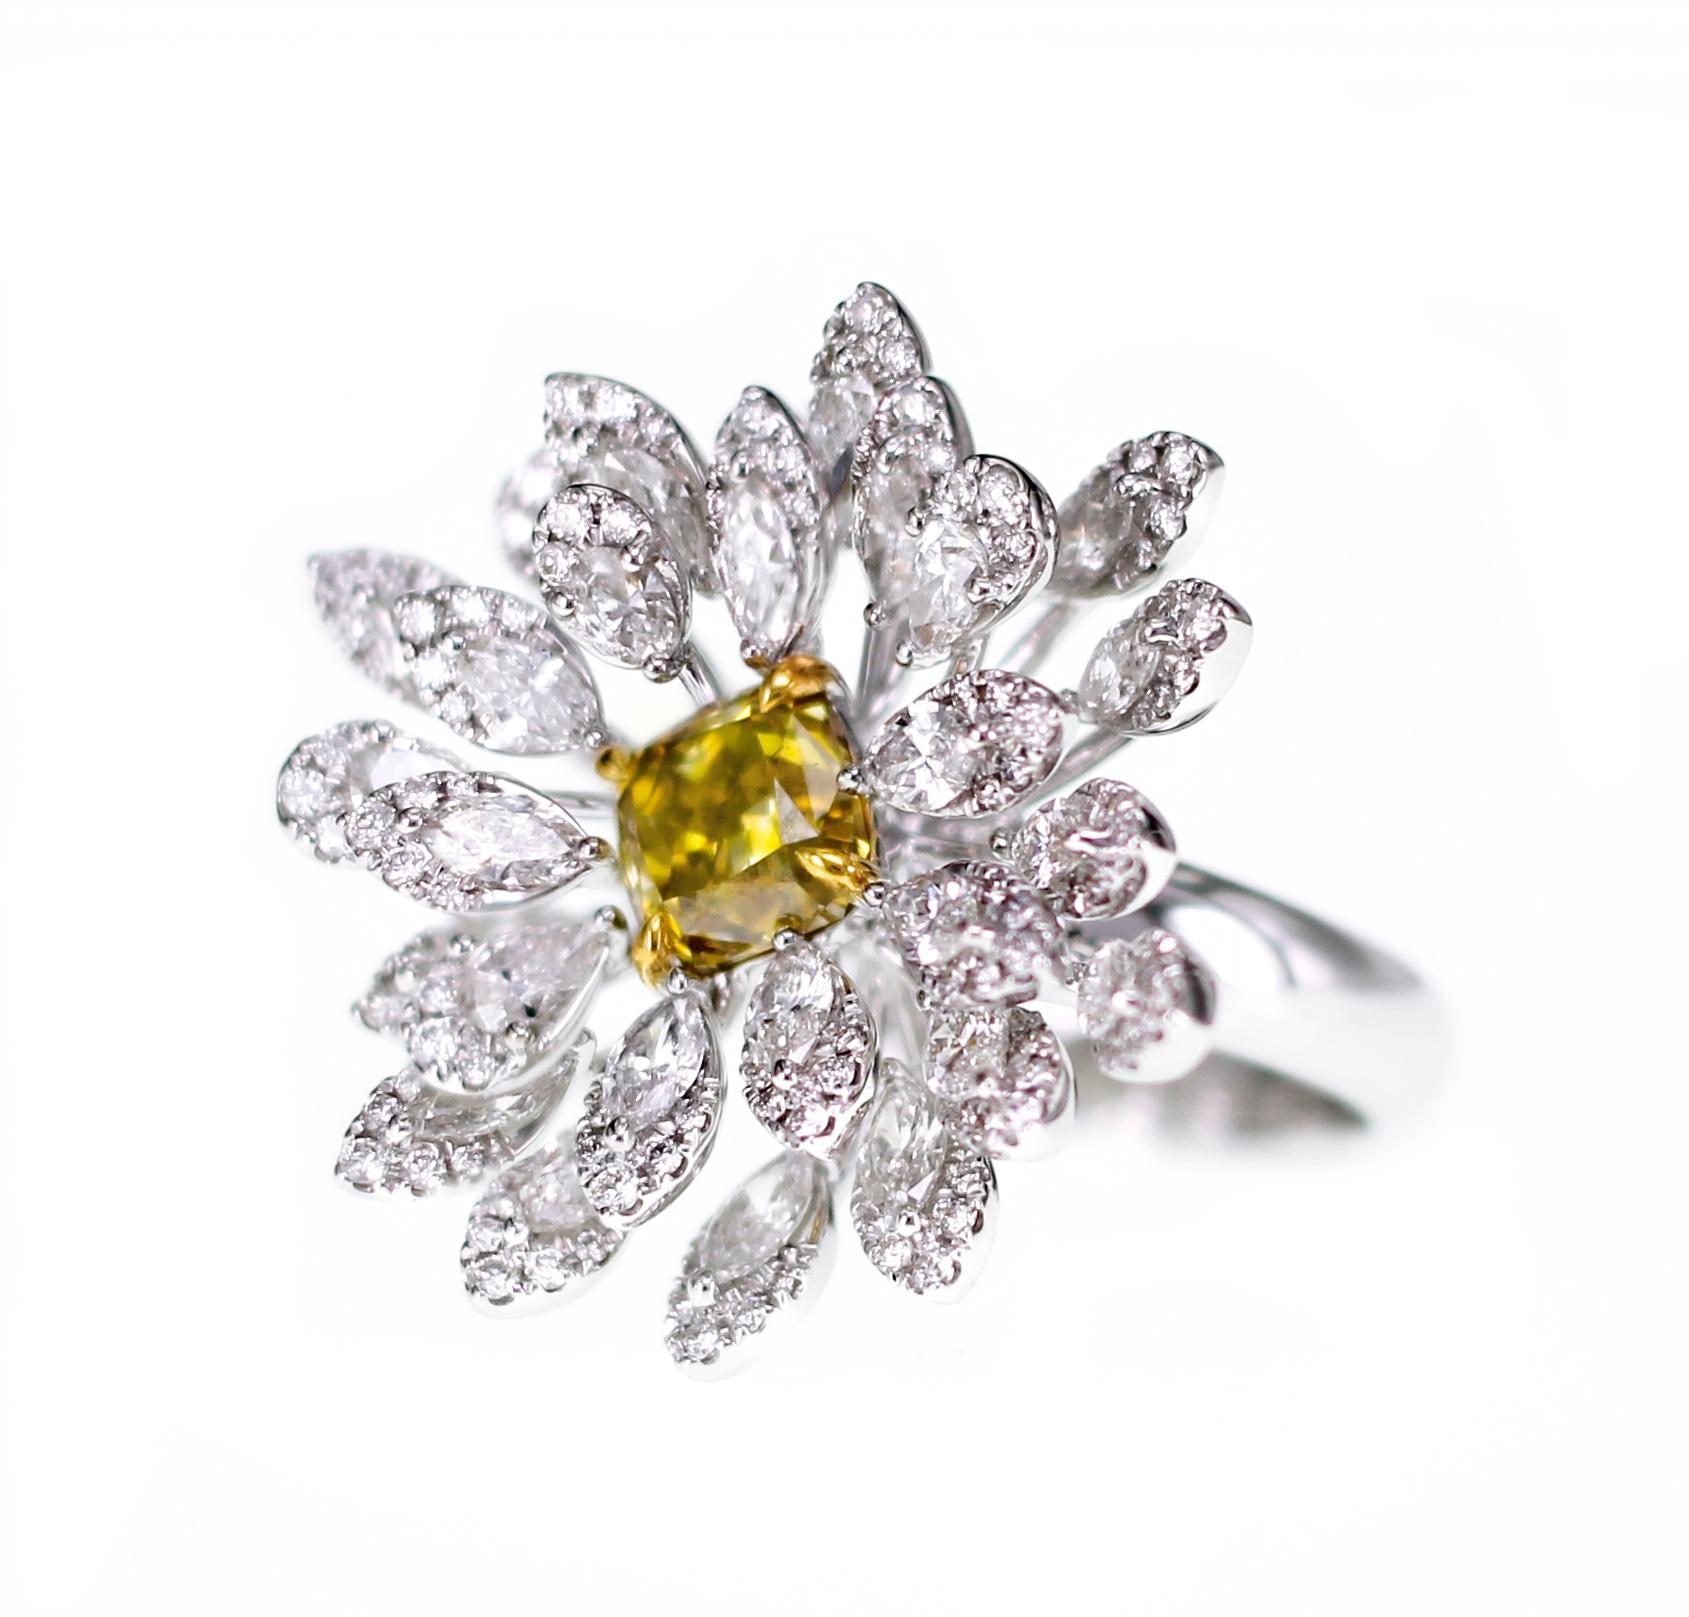 Presenting from our Grandiosa Collection, the ring has 1.87 carat of intense saturation yellow diamond with 2.88 carat of white round brilliant diamond. 